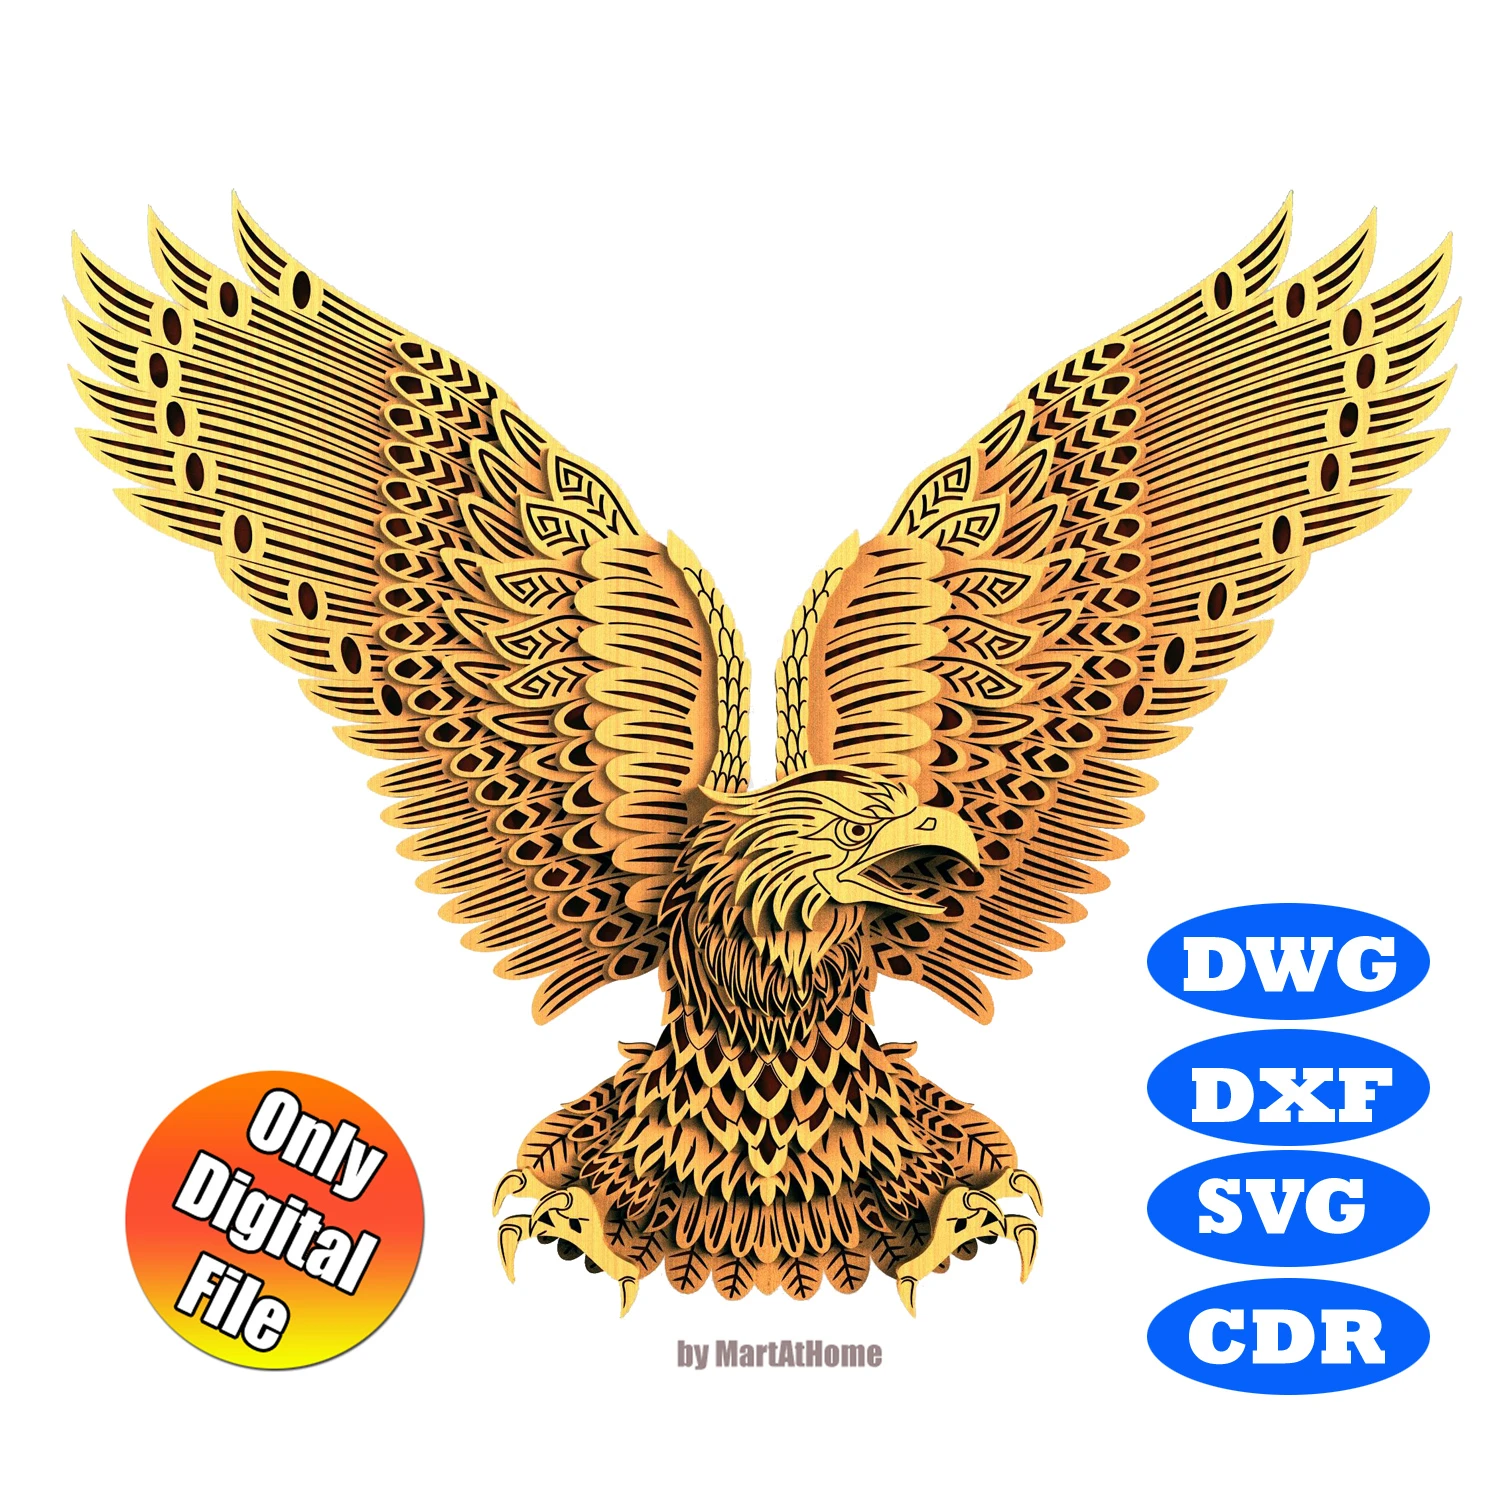 3D Multilayer Eagle Model Home Decor Wall Art DWG DXF SVG Cdr File for Laser Cutter and Cricut Maker cutting saw machine